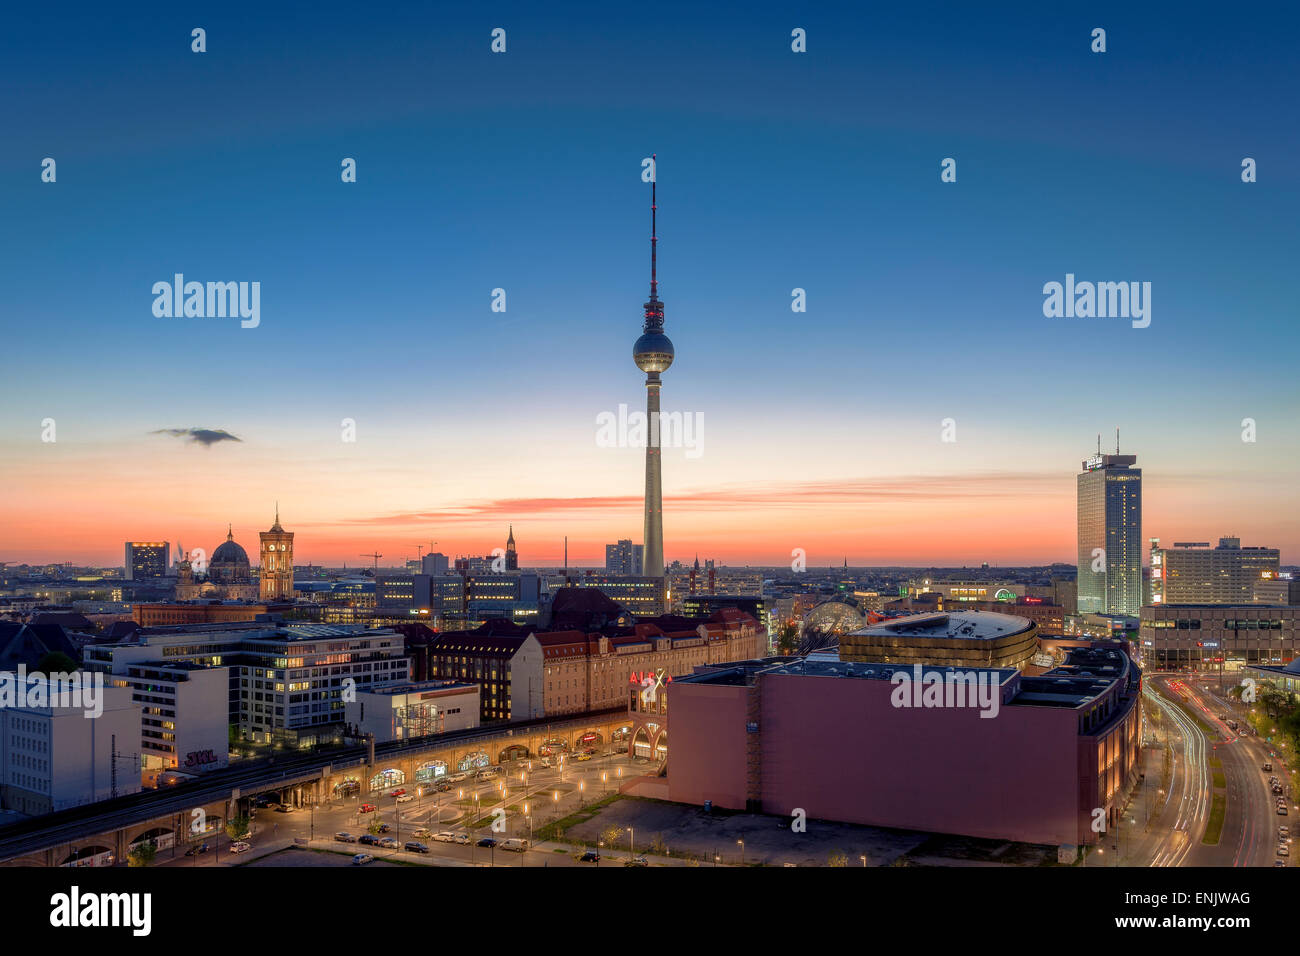 Berlin-Mitte with Alexanderplatz square, the Berlin TV Tower and the Park Inn Hotel, Berlin, Germany Stock Photo